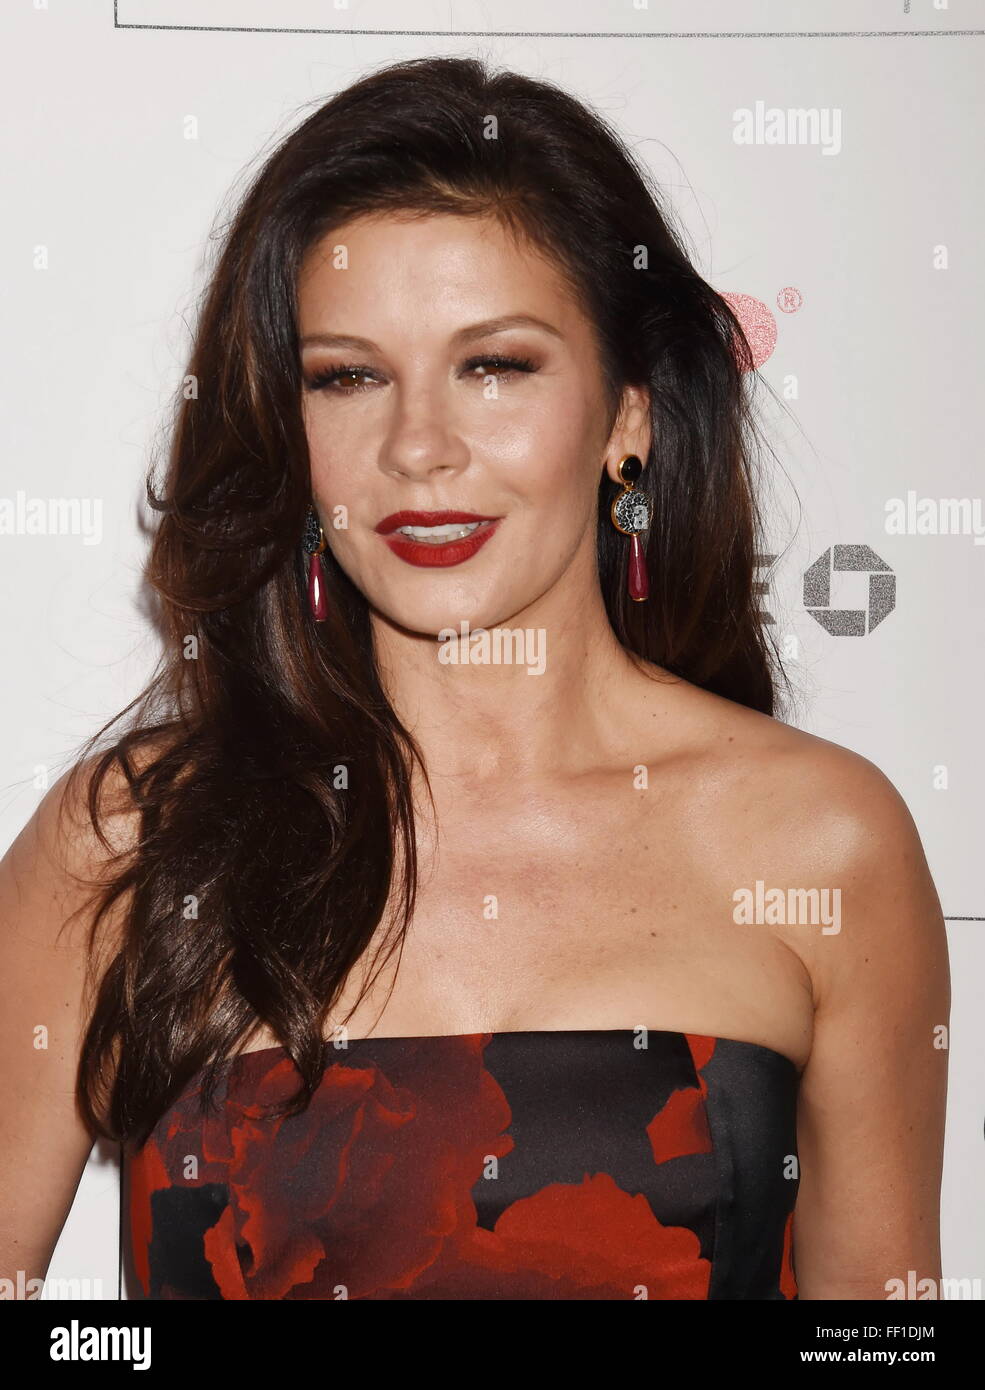 BEVERLY HILLS, CA - FEBRUARY 08: Actress Catherine Zeta-Jones attends AARP's Movie For GrownUps Awards at the Regent Beverly Wilshire Four Seasons Hotel on February 8, 2016 in Beverly Hills, California. Stock Photo